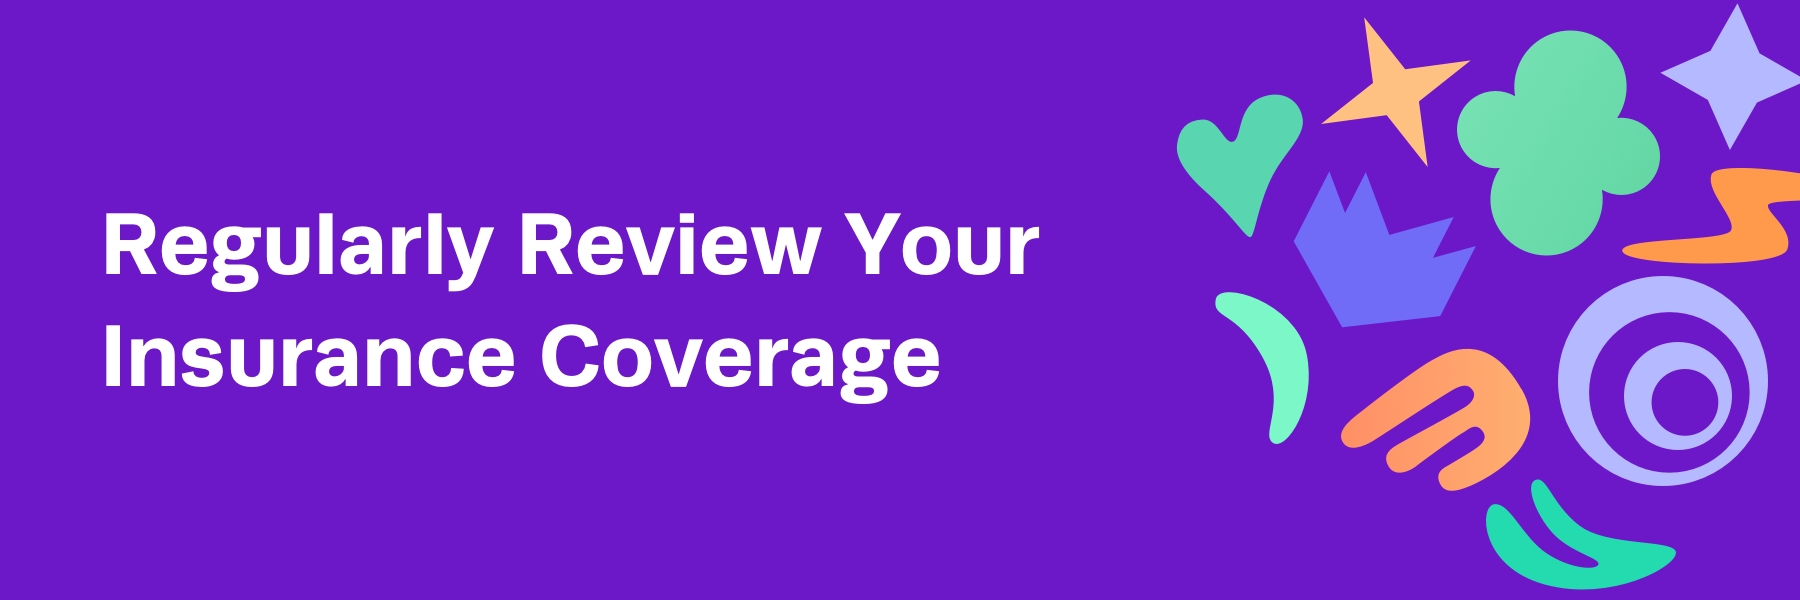 Regularly Review Your Insurance Coverage